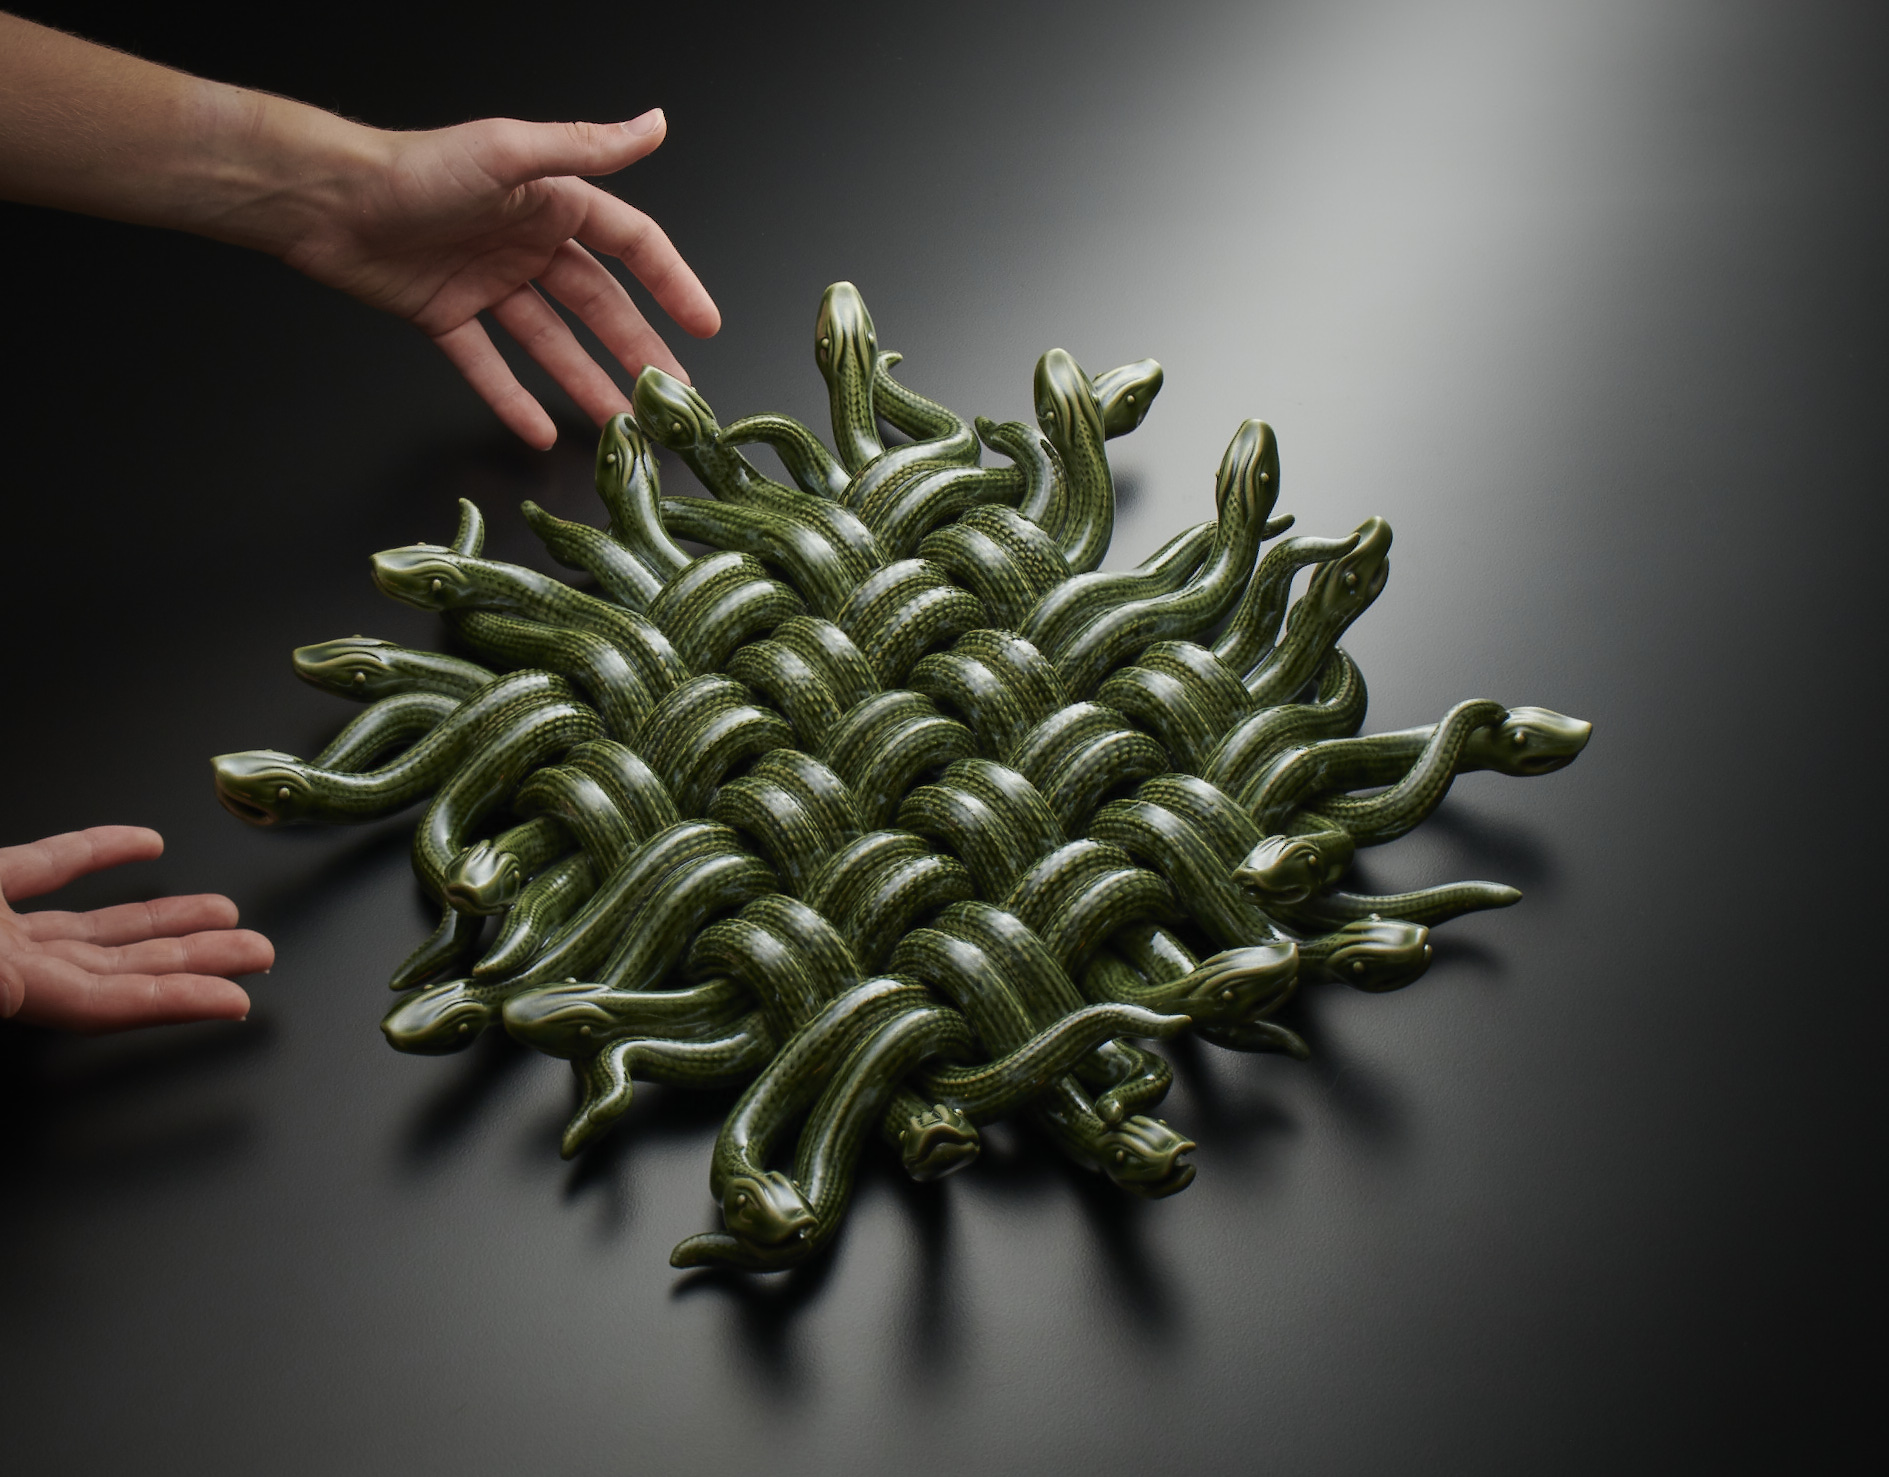 A ceramic sculpture of snakes woven into a mat. Photographed on a black background with hands reaching for it.